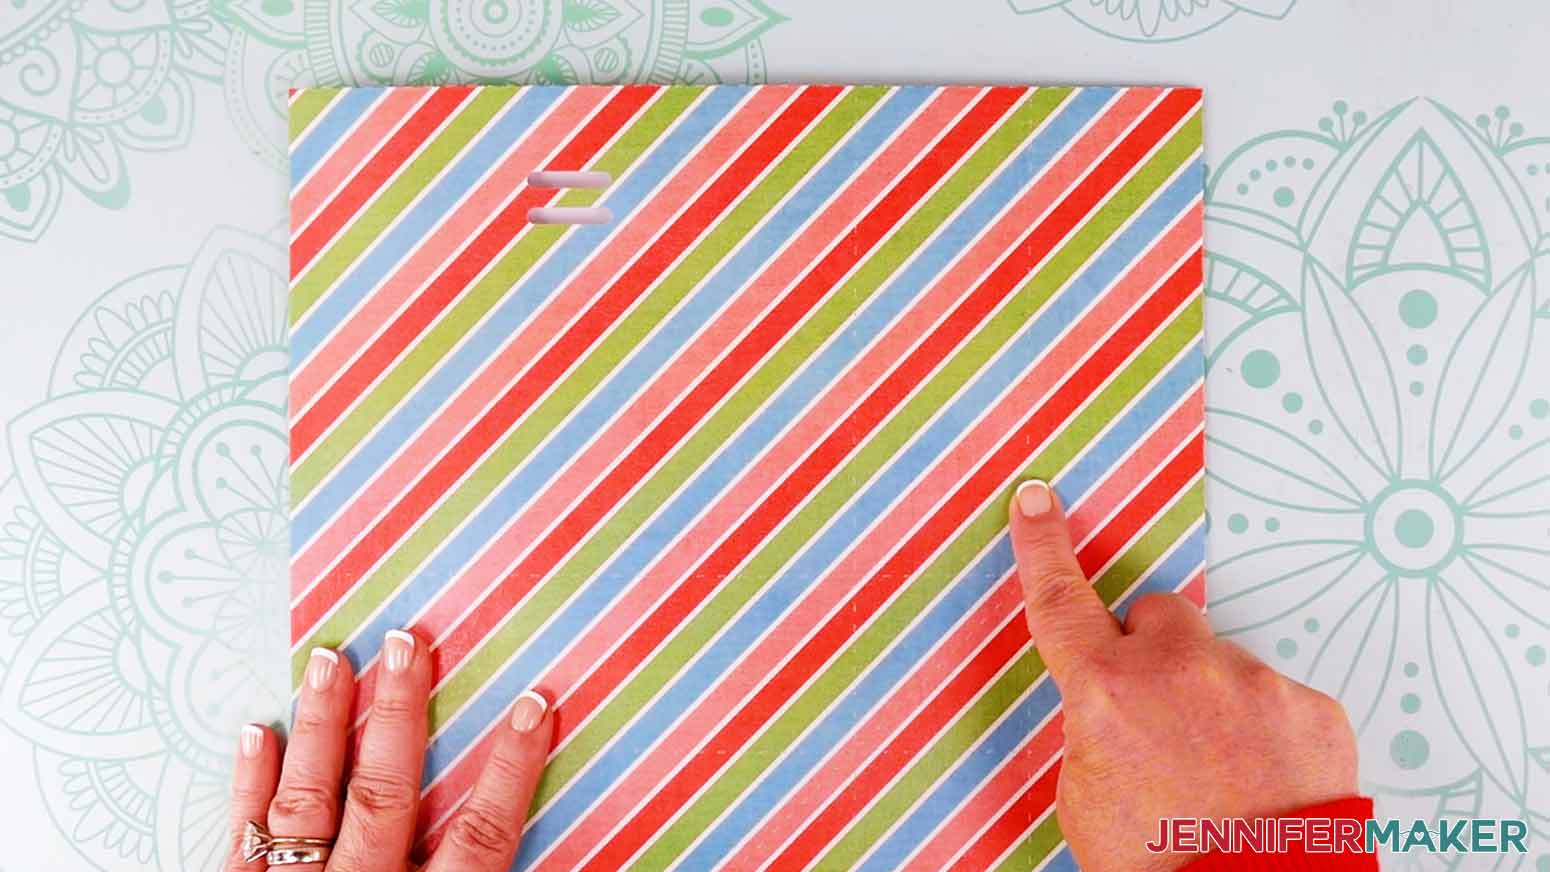 Locate the vertical lines on the gift bag sheet.